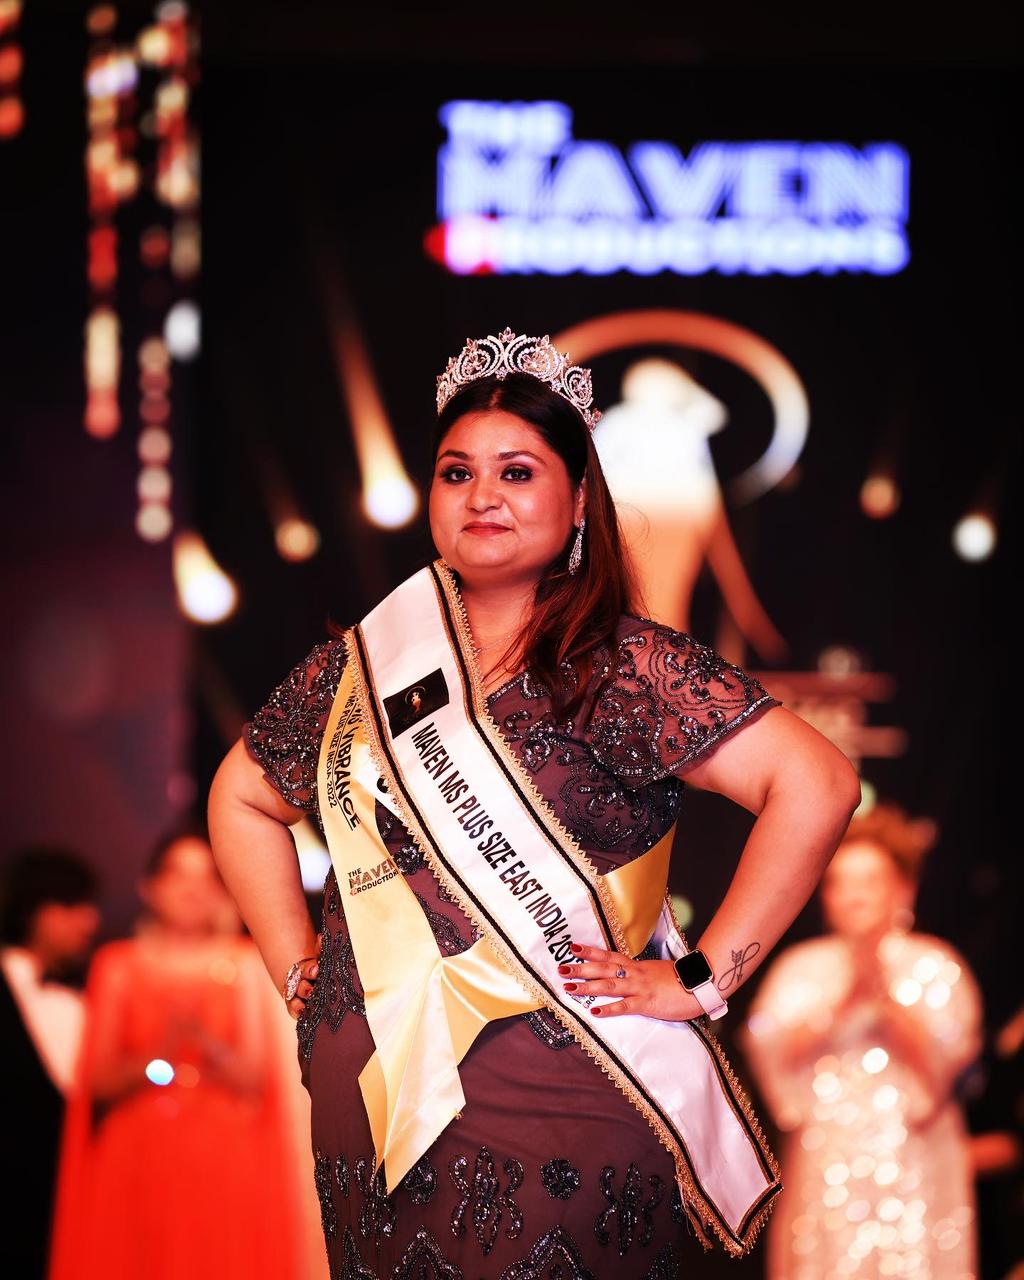 Nabonita Ganguly by hard work won the Maven Miss Plus Size East India 2022 organised by Maven Productions